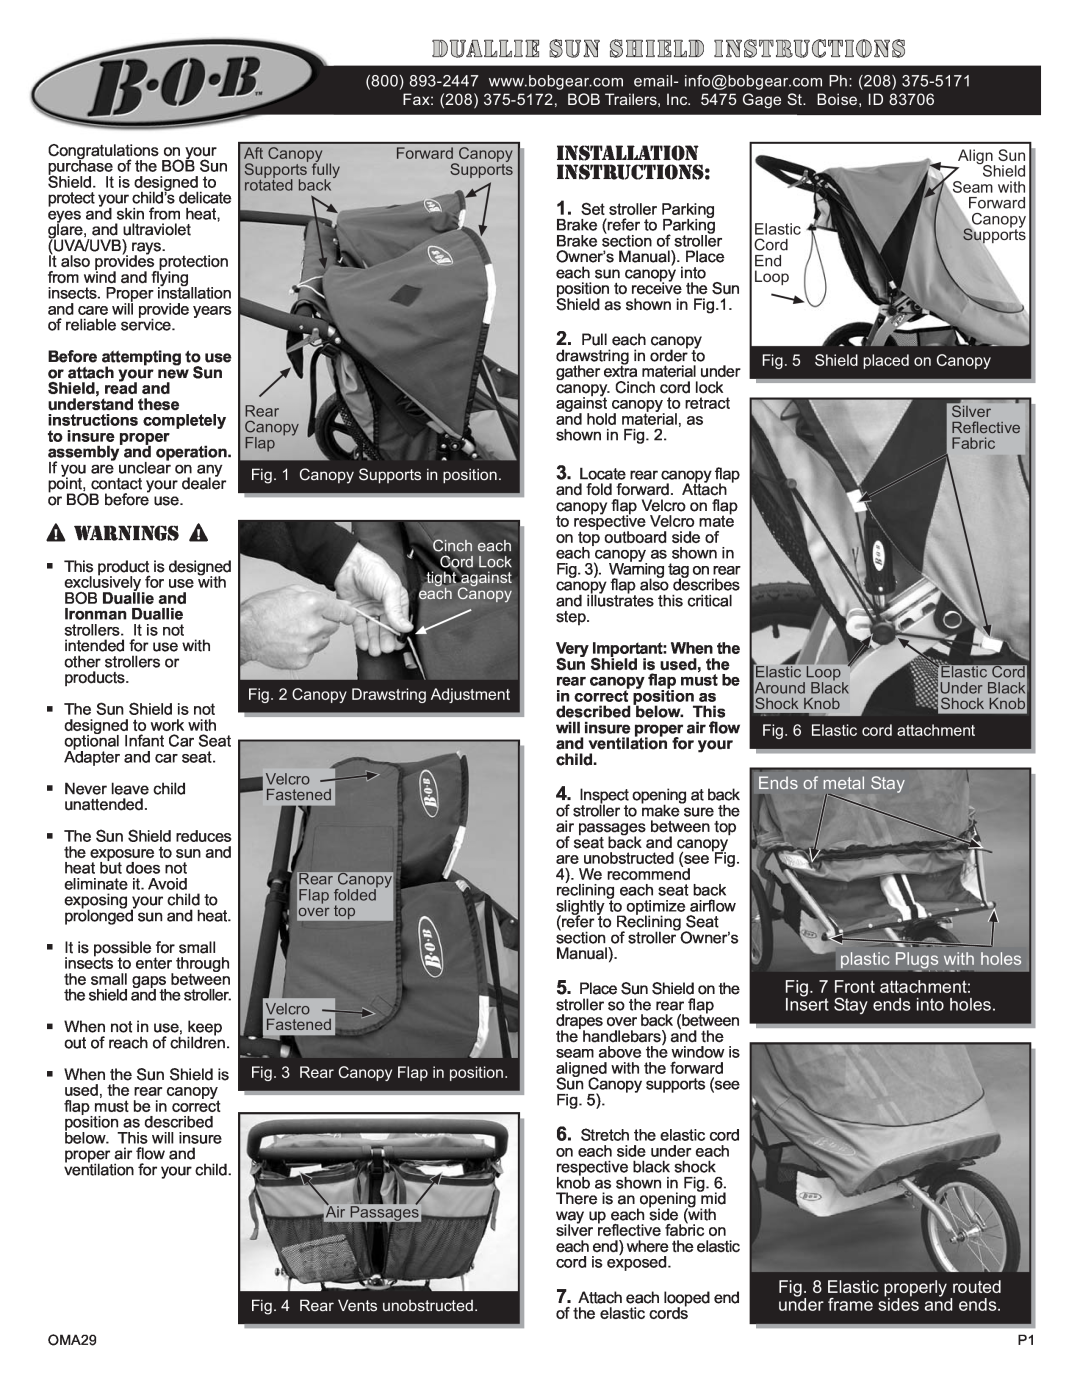 BOB OMA12A installation instructions Installation Instructions, Warnings, Canopy Supports in position 